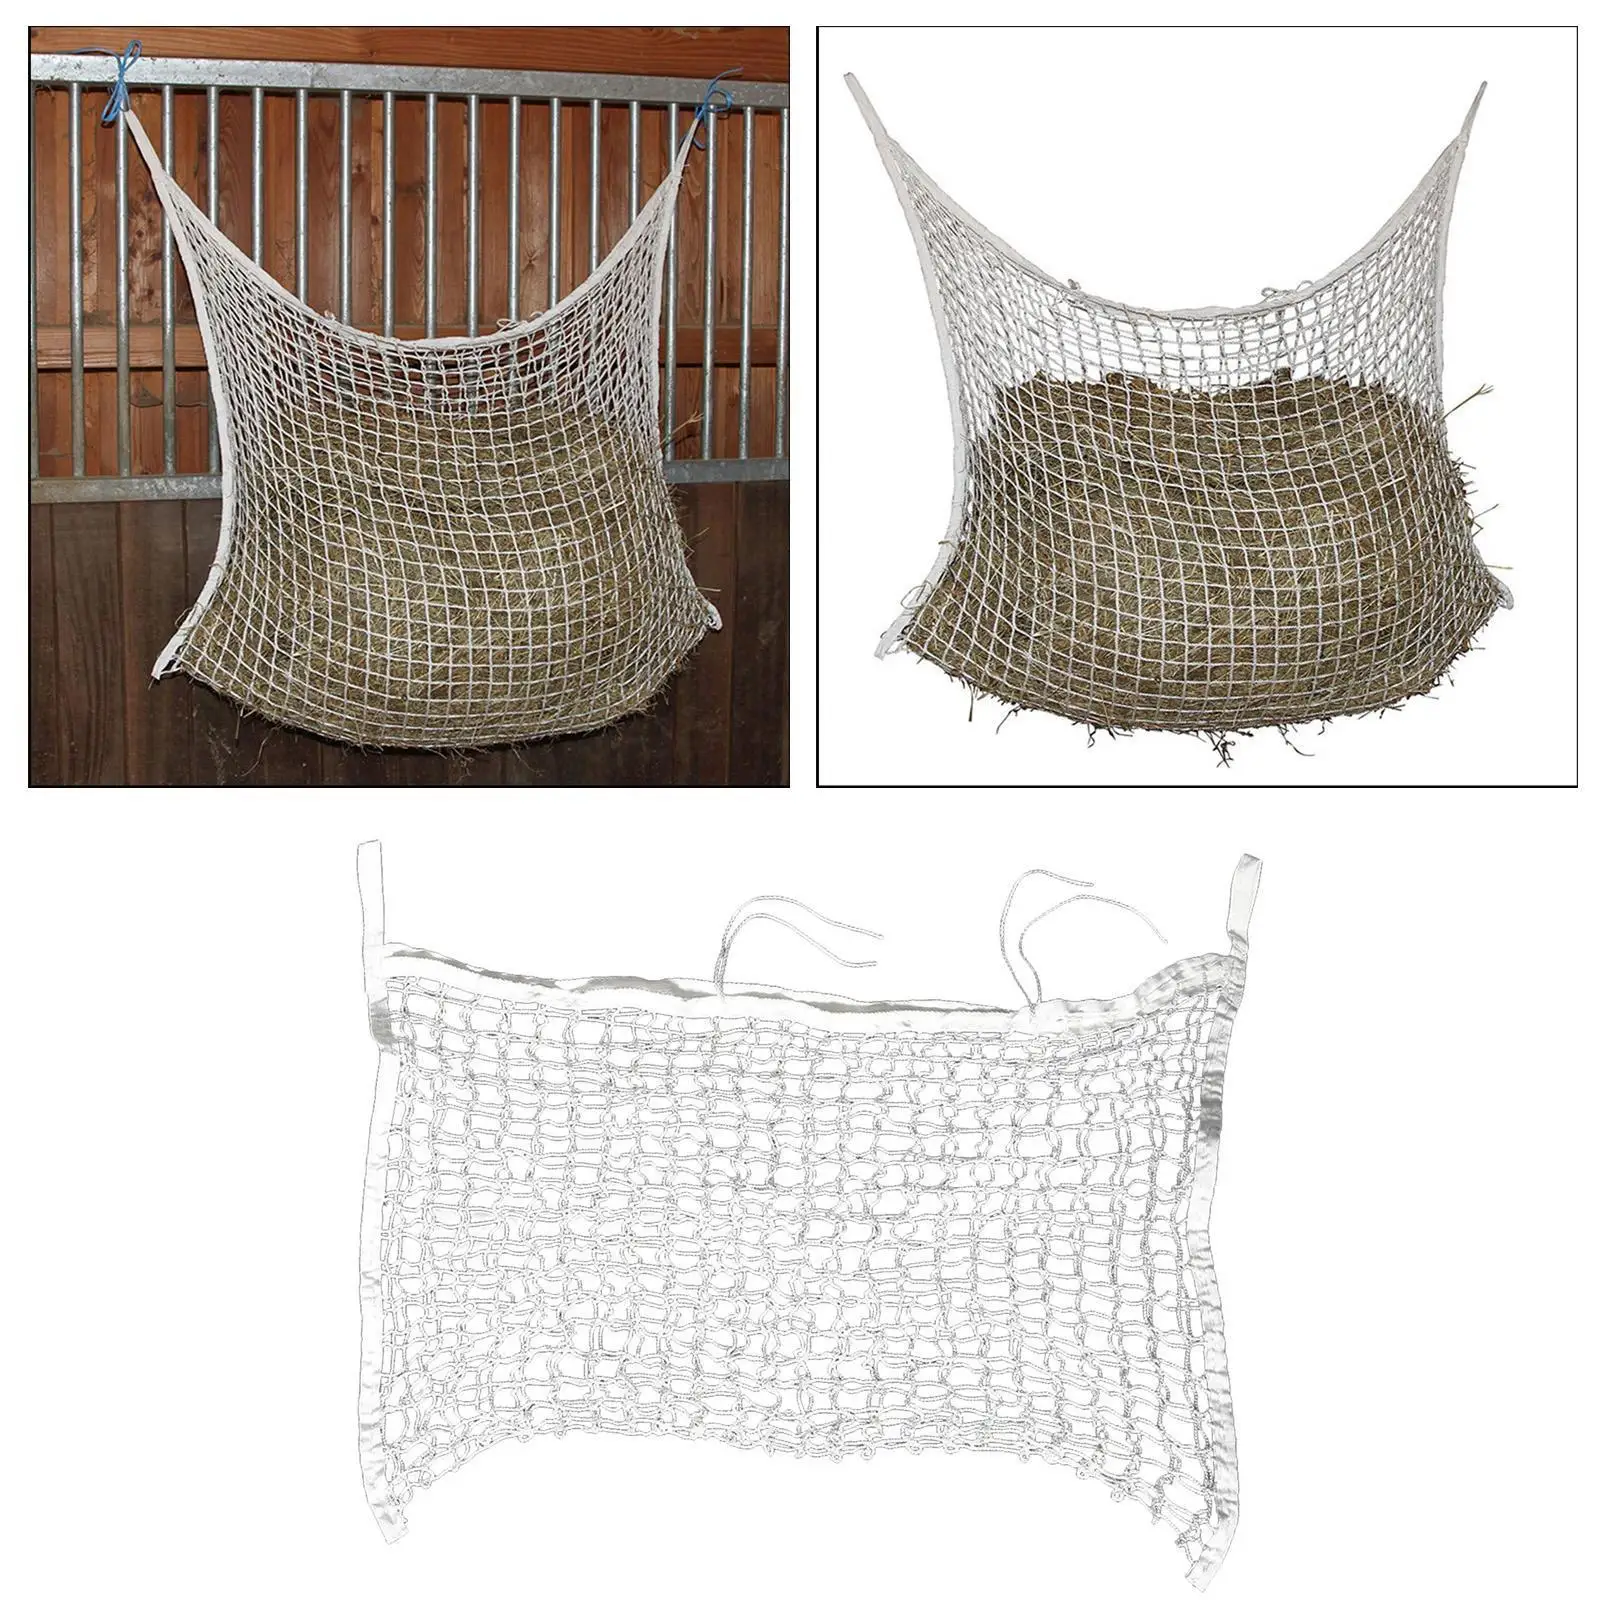   Horse Hay Net Bag Horse Feed Hanging Large Capacity Feeding Mesh Straw Bag with Small Holes Equestrian Supplies